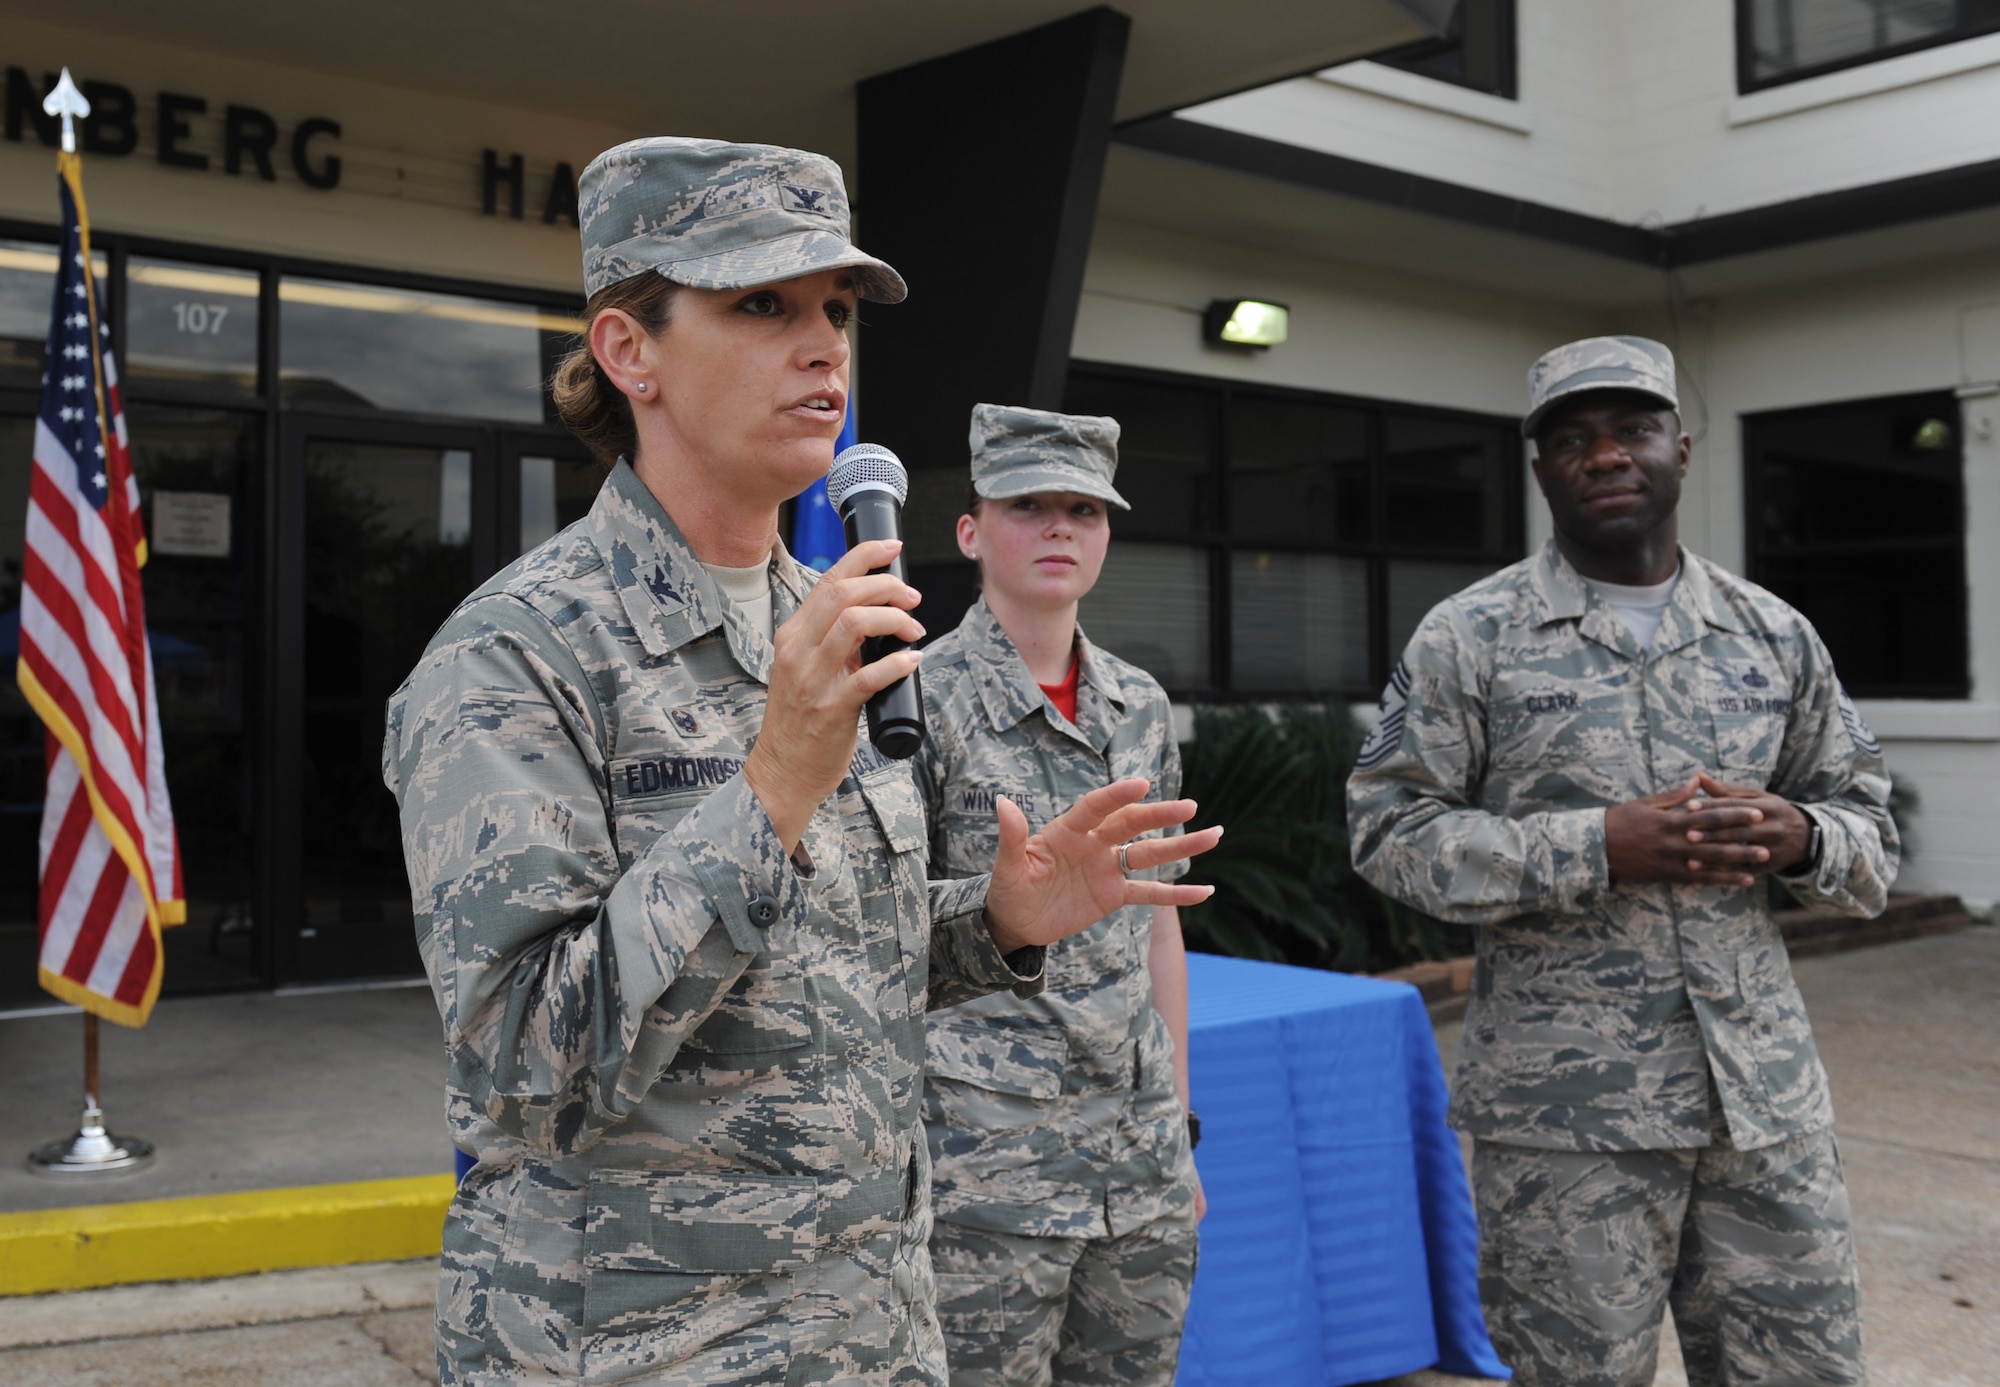 Col. Michele Edmondson, 81st Training Wing commander, delivers remarks during Keesler’s Air Force birthday celebration in front of Vandenberg Hall Sept. 16, 2016, on Keesler Air Force Base, Miss. The event included a cake-cutting ceremony, music and food to celebrate the Air Force’s 69th birthday. (U.S. Air Force photo by Kemberly Groue/Released)